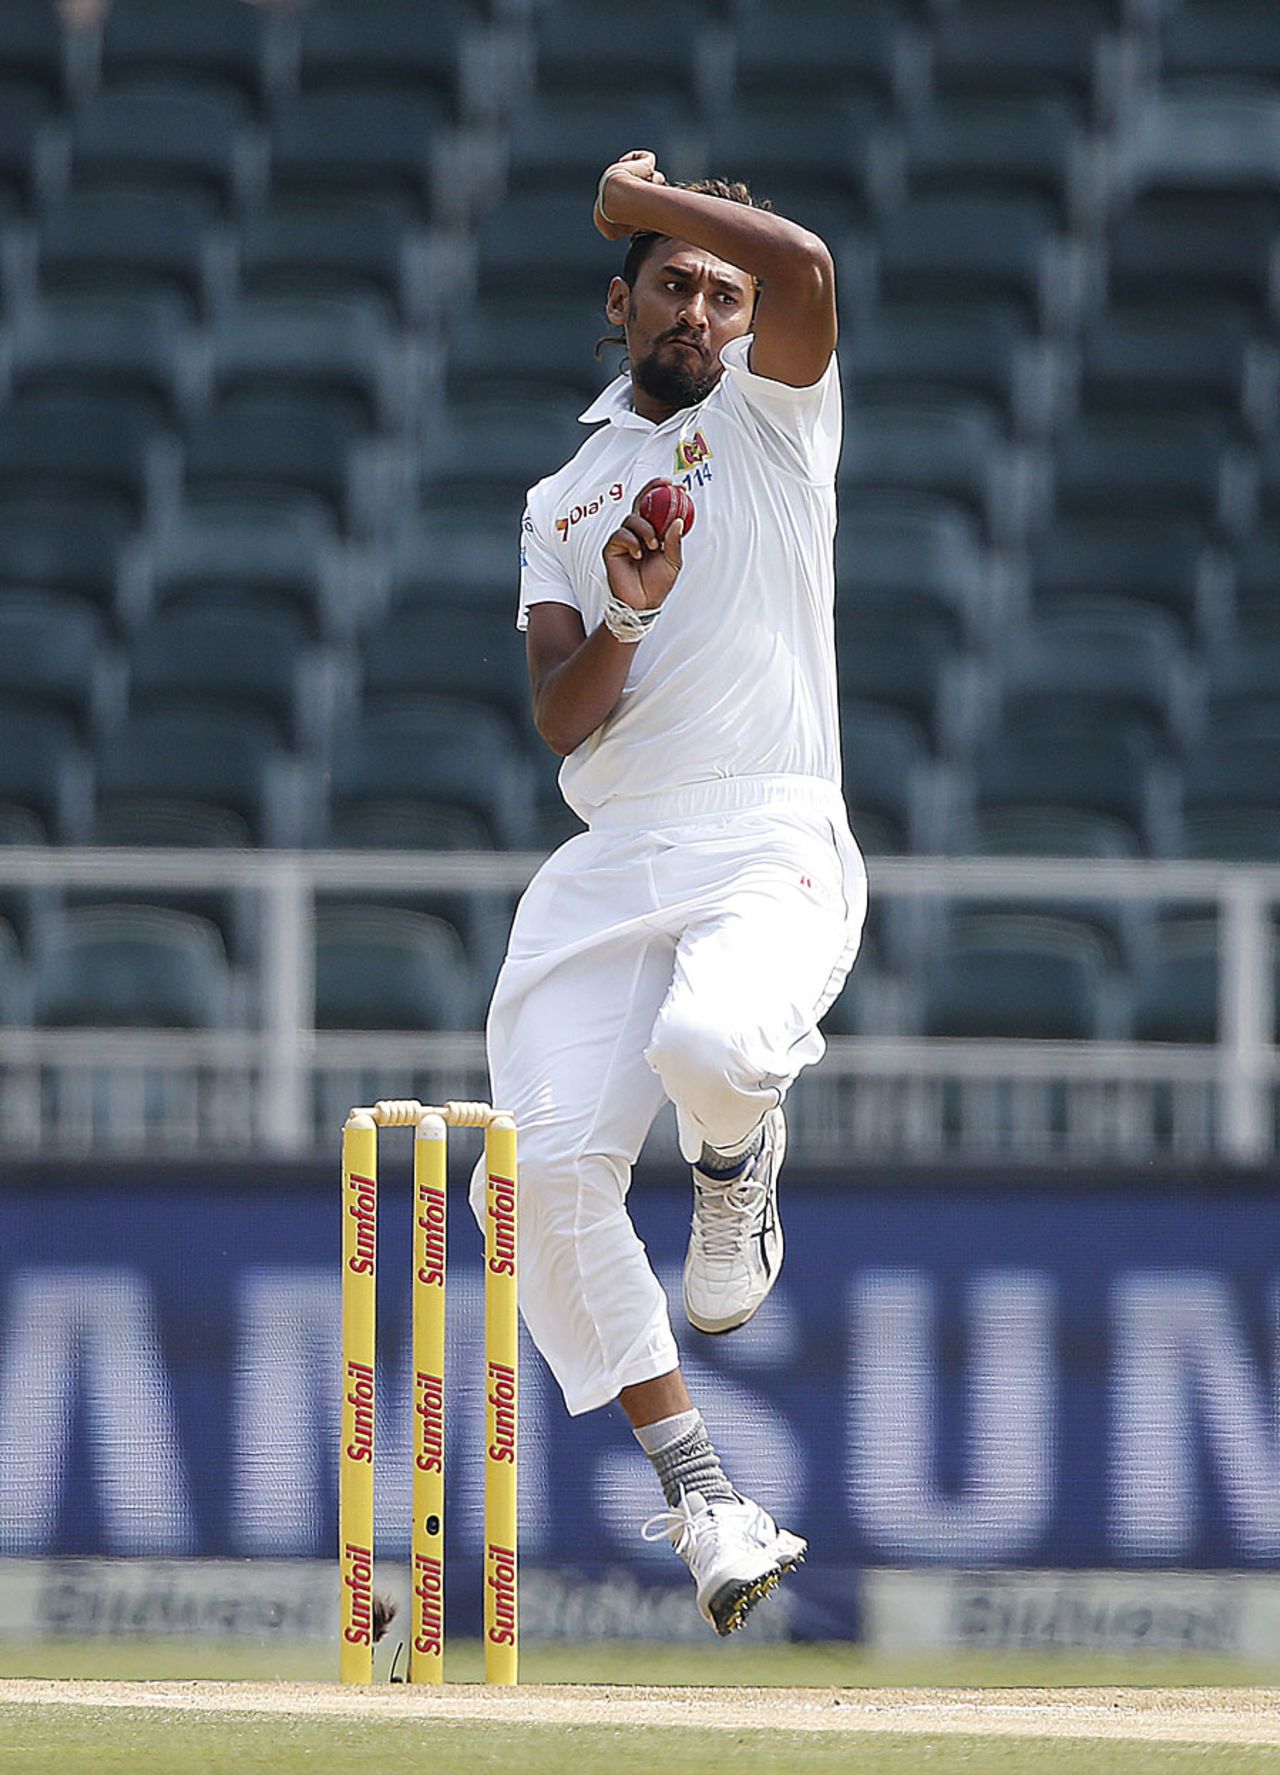 Suranga Lakmal bowled a luckless spell on the second morning, South Africa v Sri Lanka, 3rd Test, Johannesburg, 2nd day, January 13, 2017